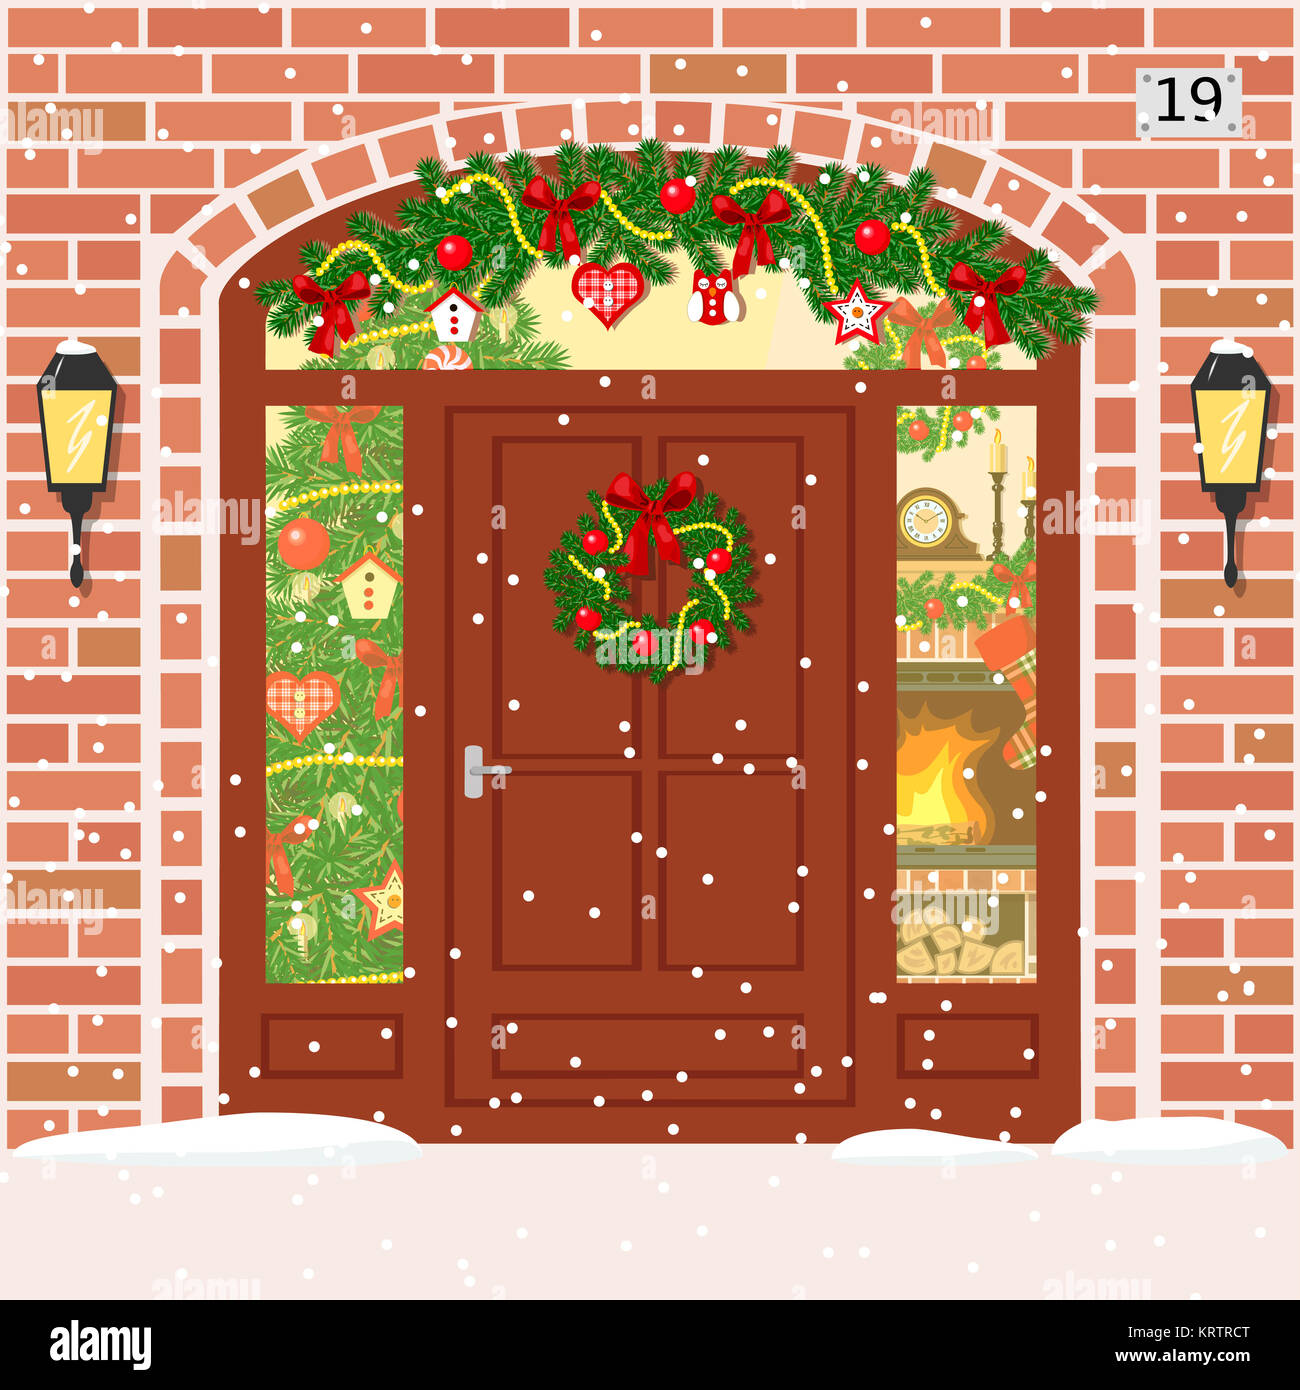 Christmas decorated door with Sidelight Window, wreath and garland Stock Photo